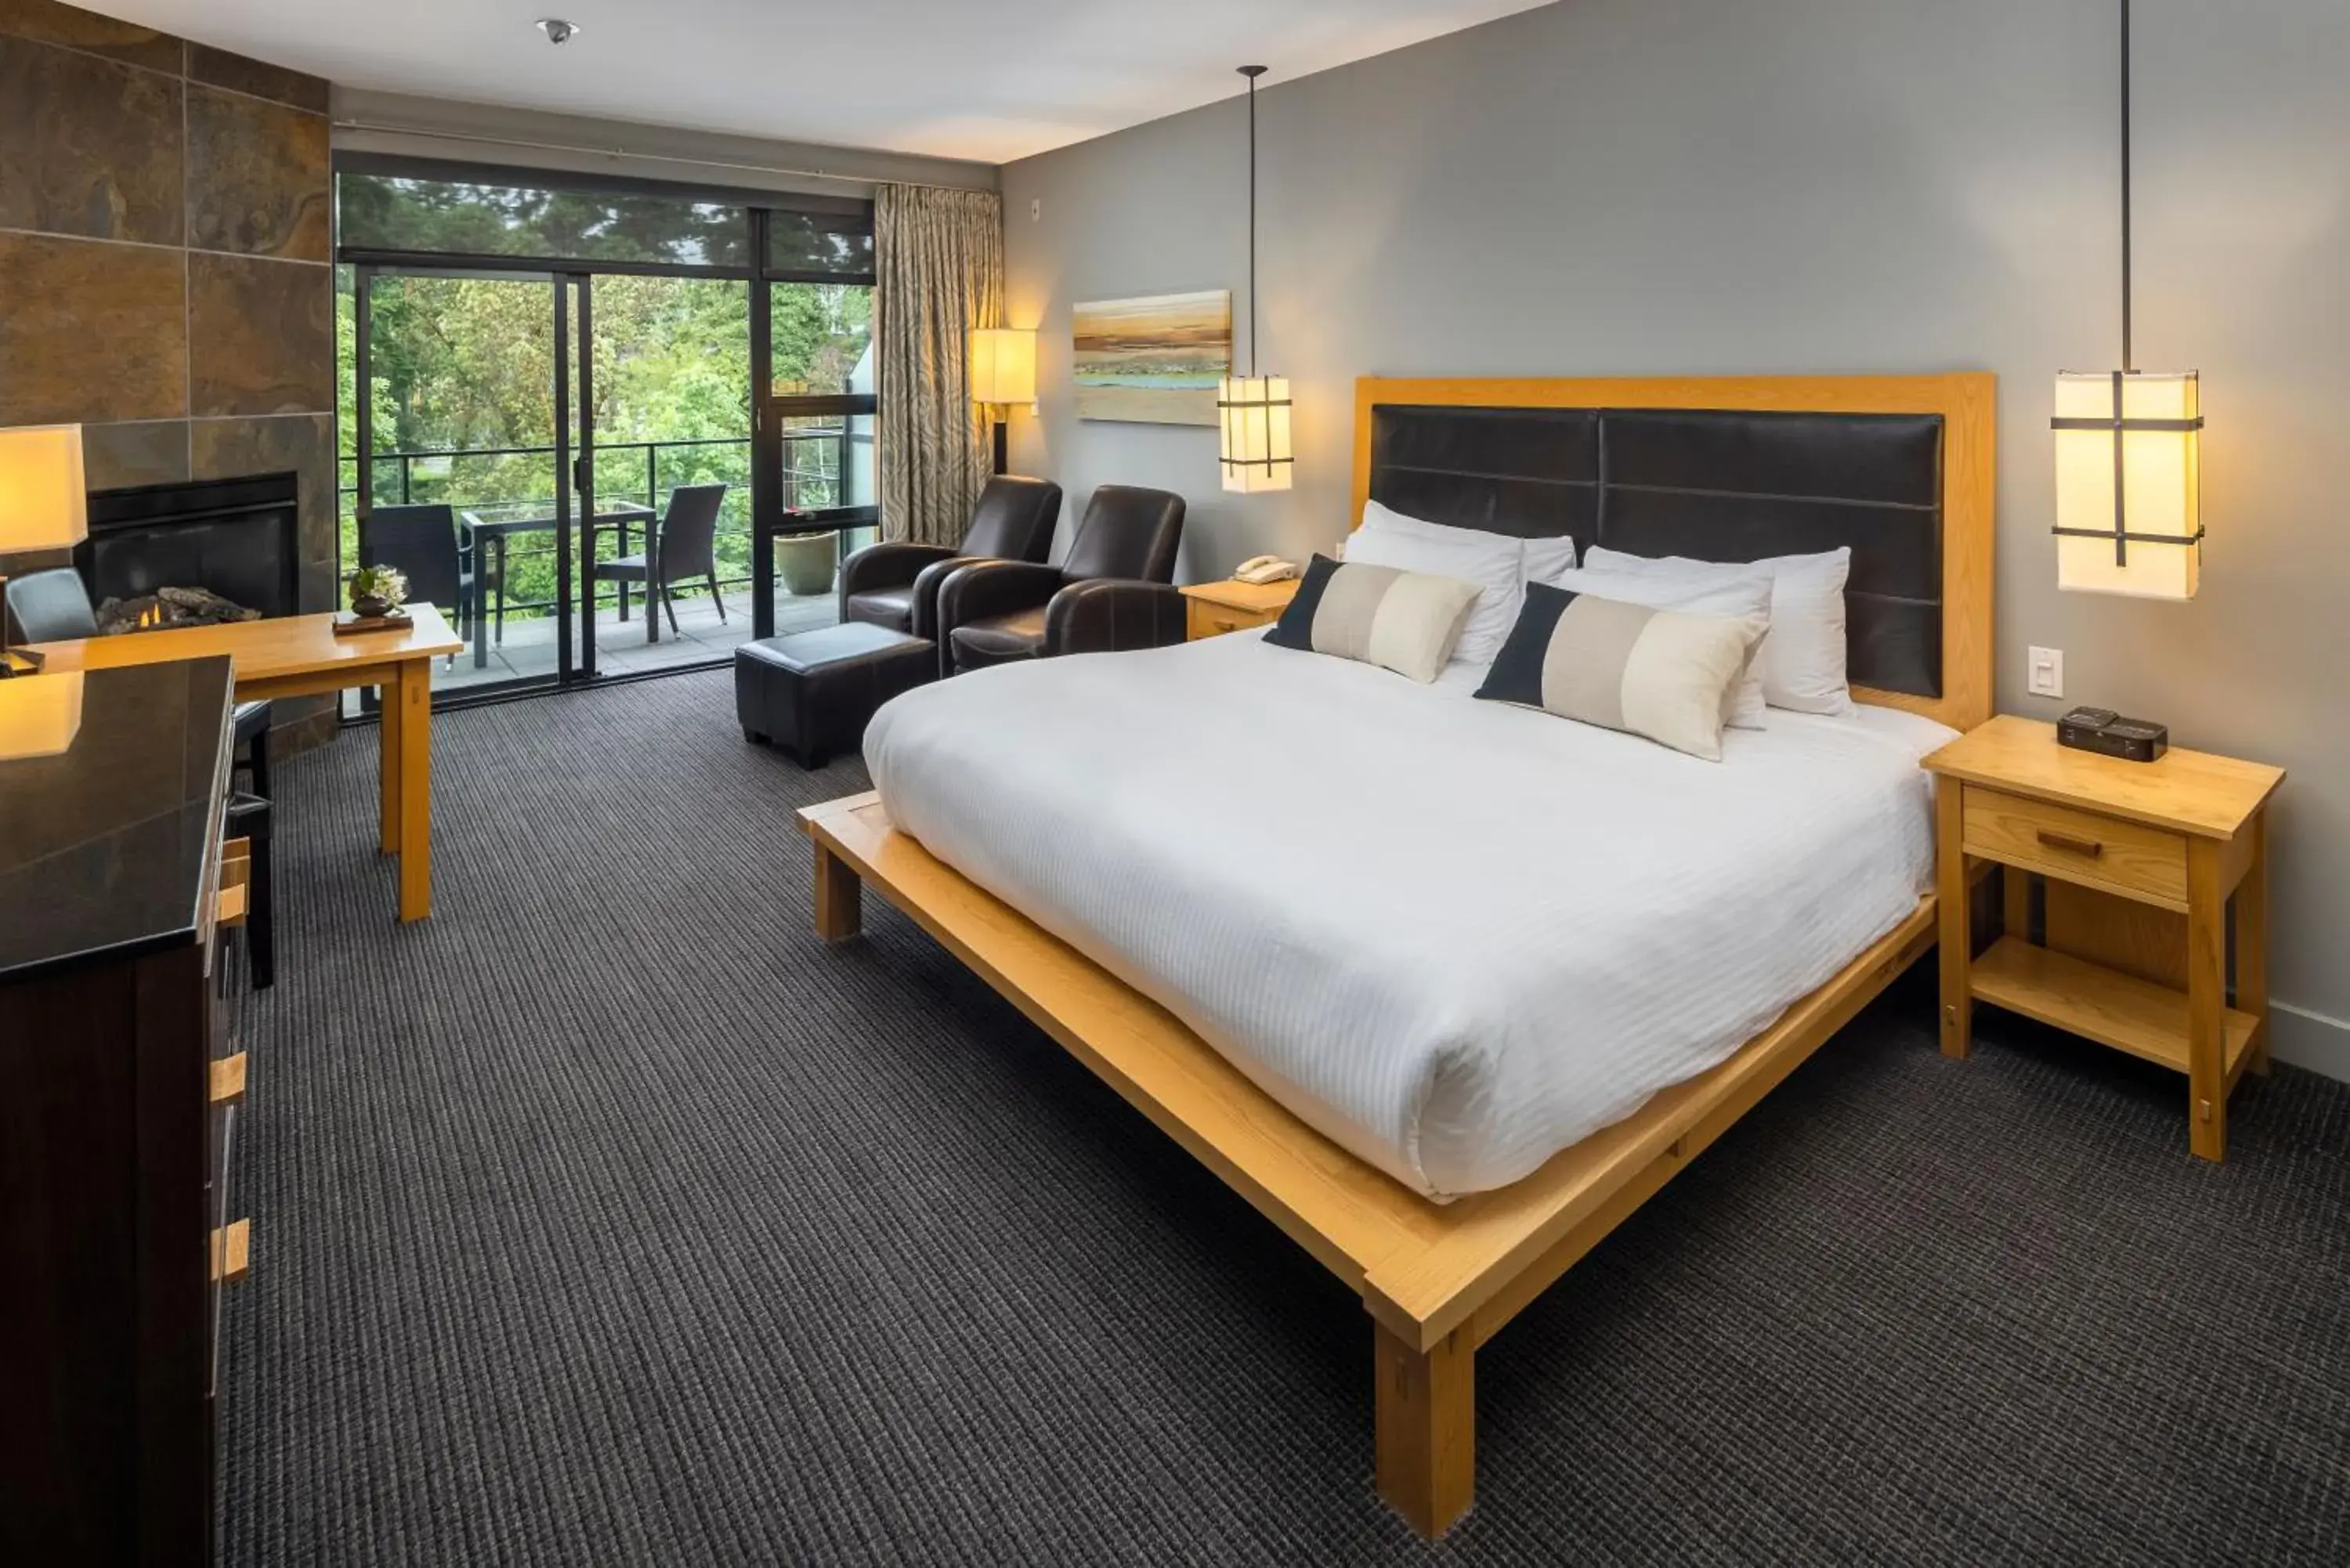 Bed in Brentwood Bay Resort